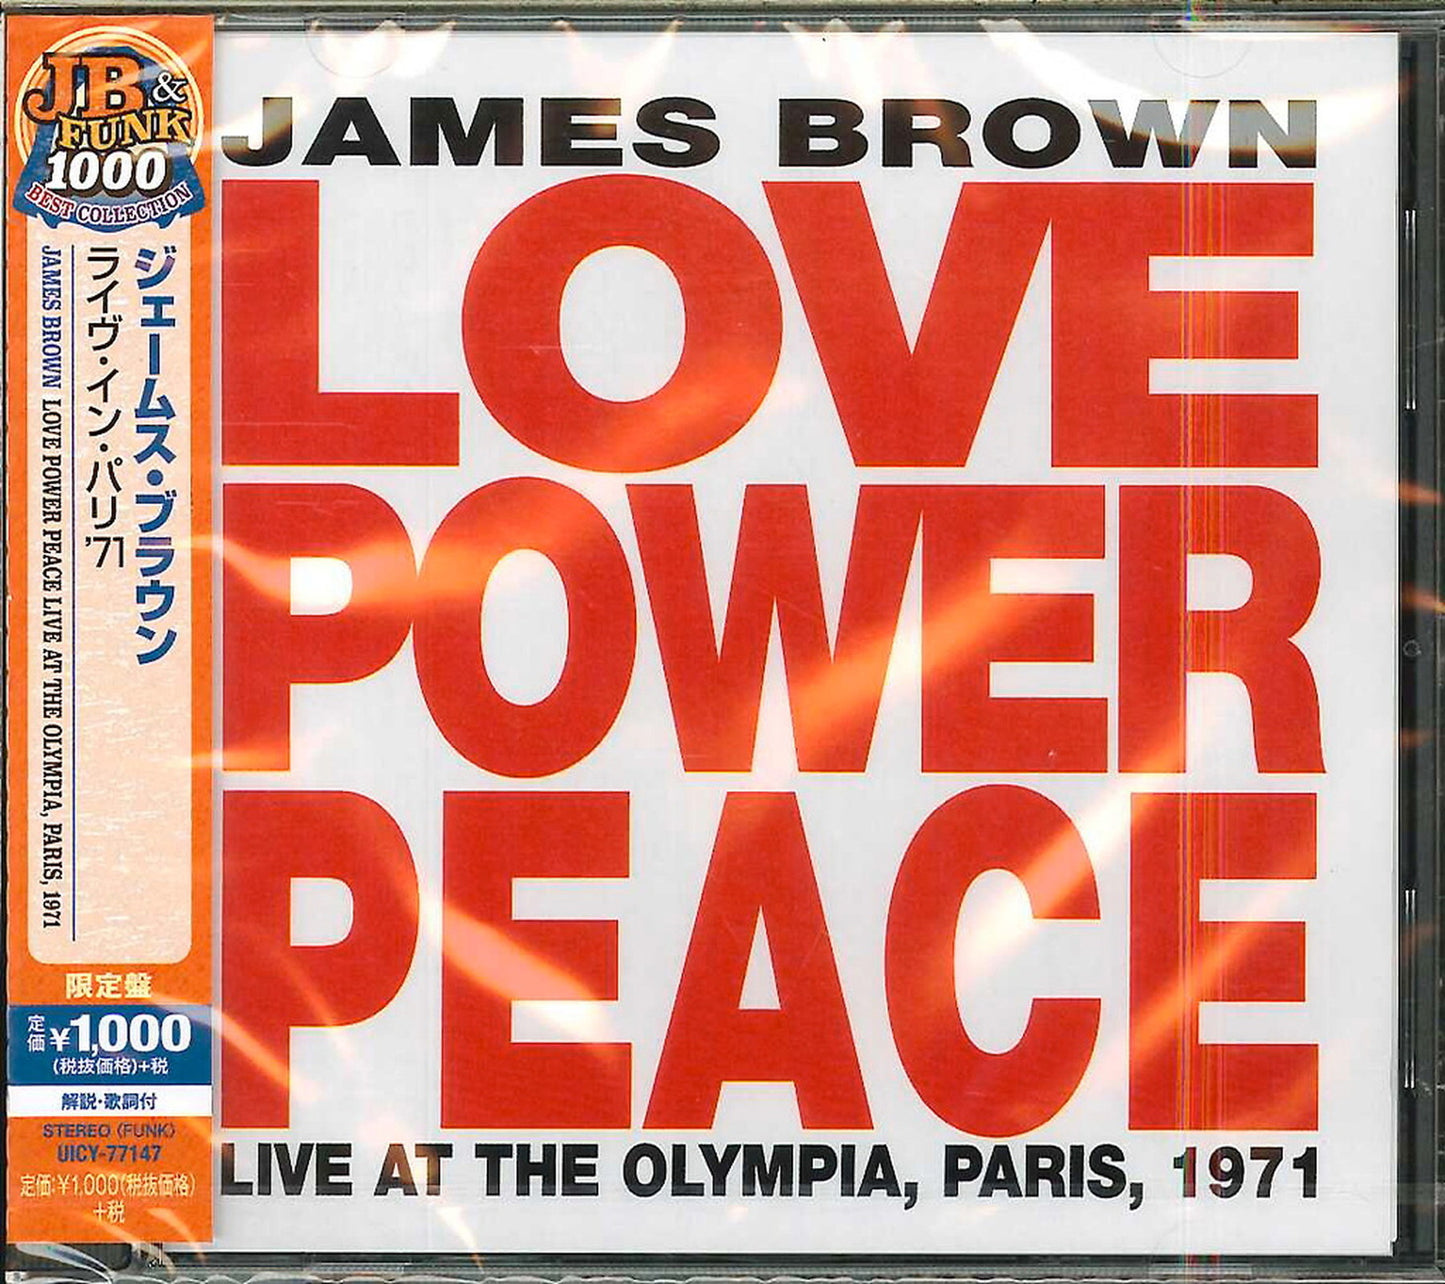 James Brown - Love. Power. Peace Live At The Olympia - Japan CD